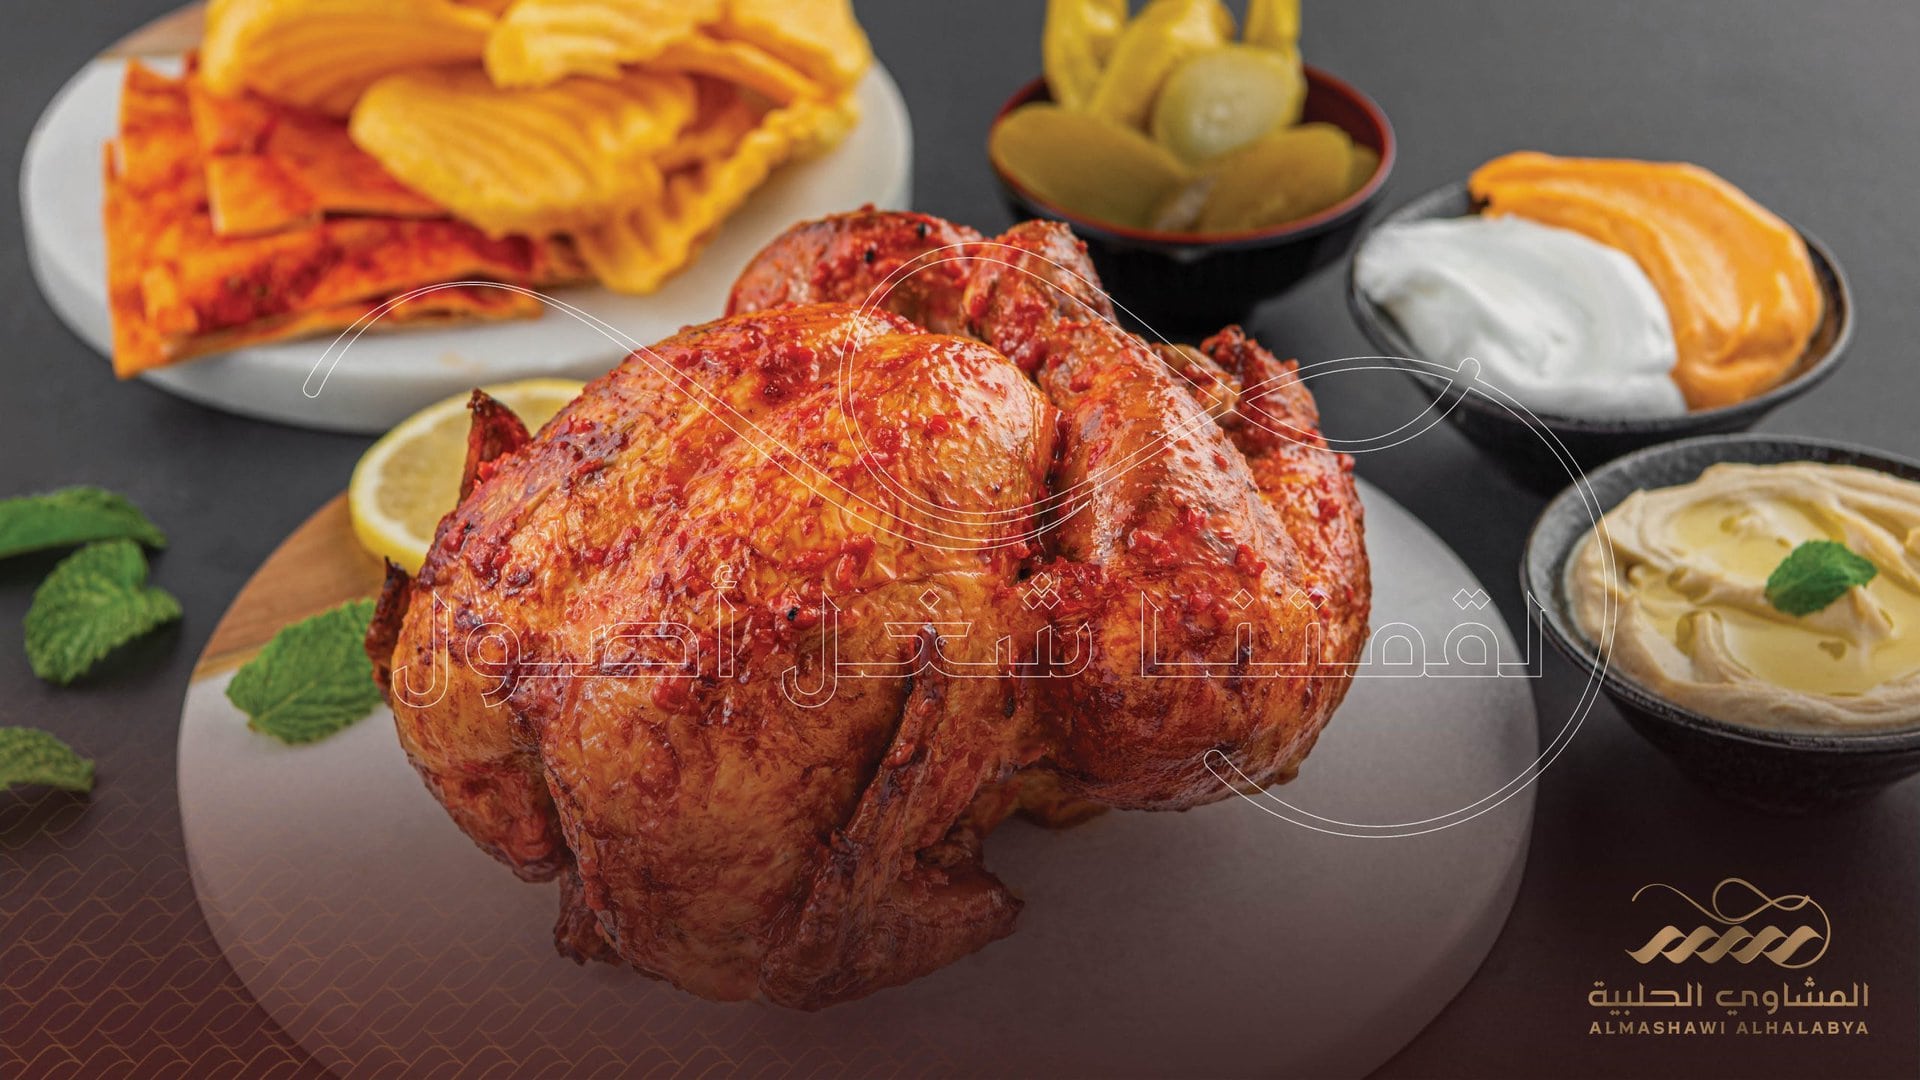 Taste the Best Barbeque Dishes at Budget Prices Visit Our Top Grill Restaurant in Sharjah